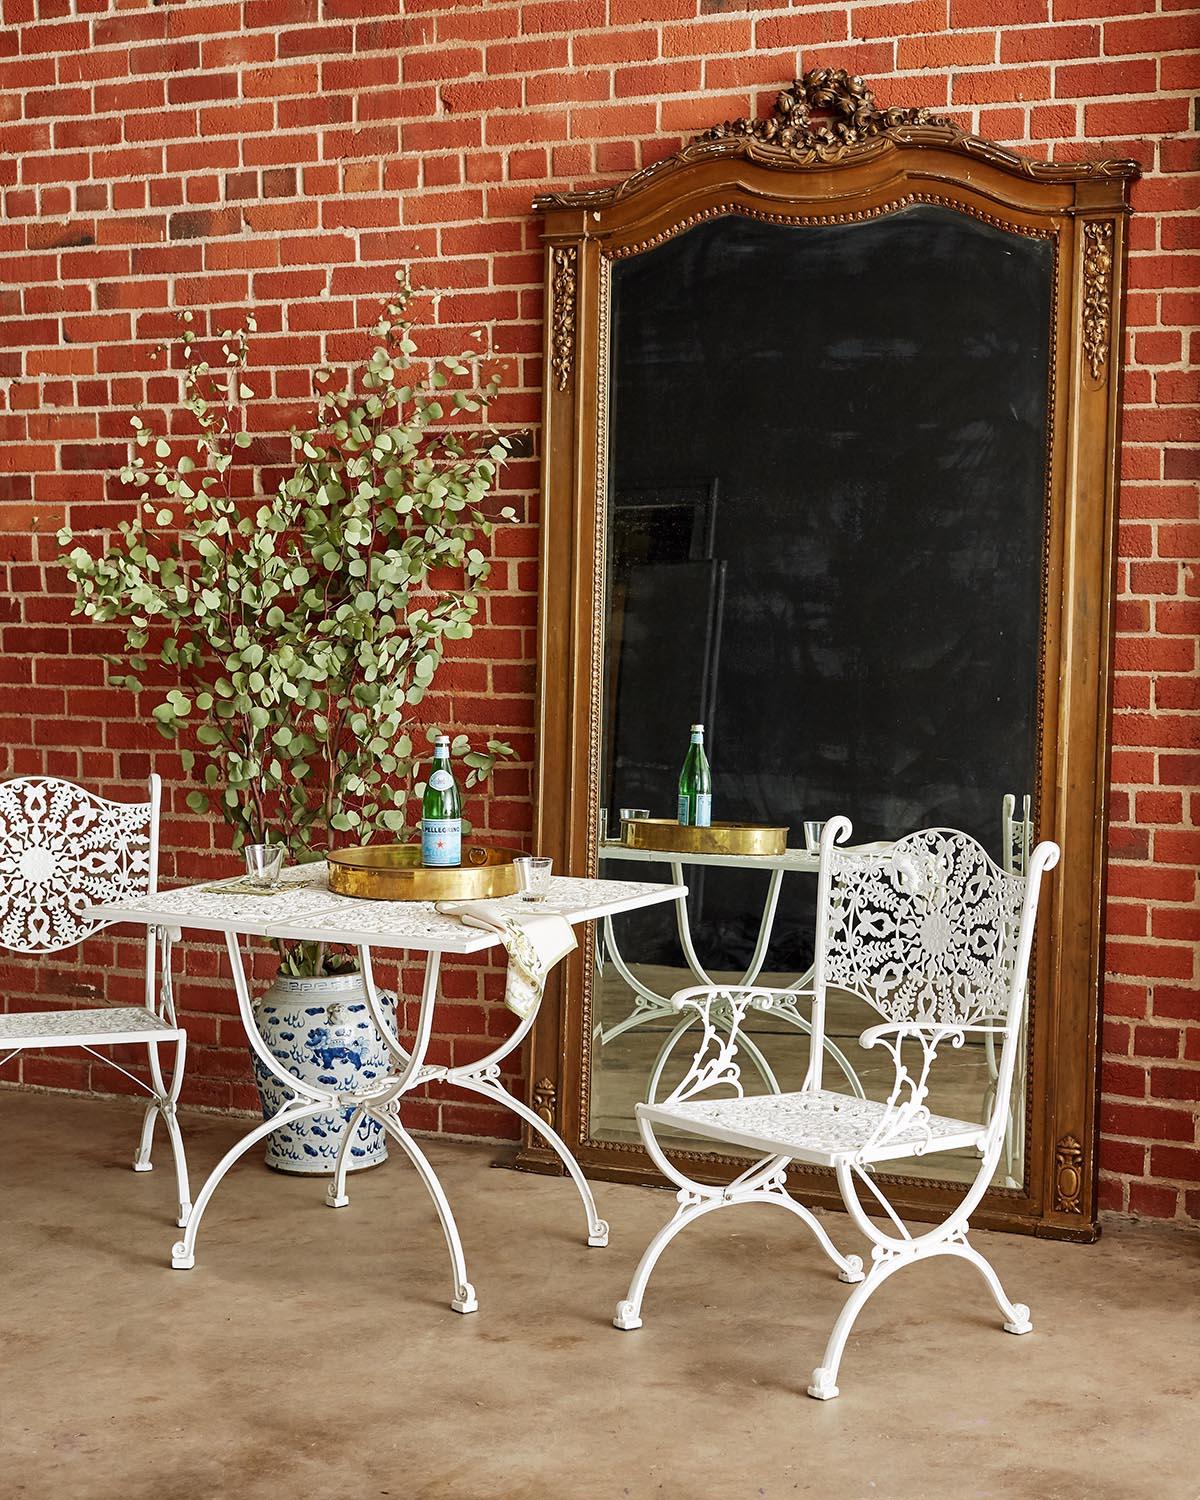 Remarkable set of four aluminum garden patio chairs made in the neoclassical taste. Featuring a delicate seat and back decorated with a foliate sunburst design. The arms, legs, and tops all have scrolled ends and the chairs are supported by curule